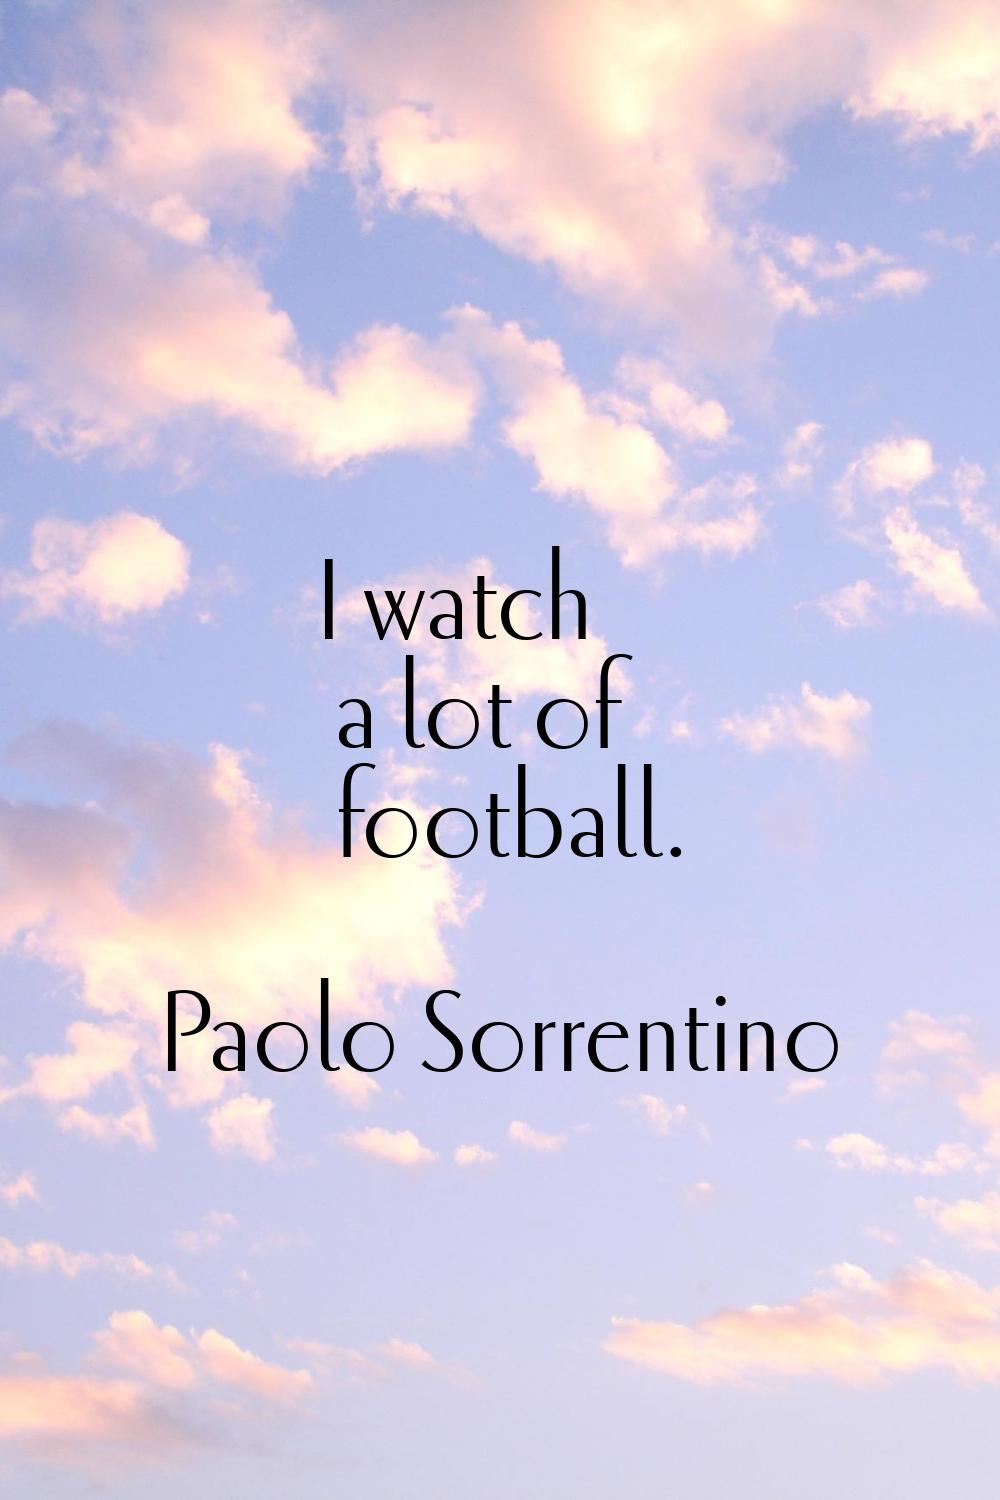 I watch a lot of football.